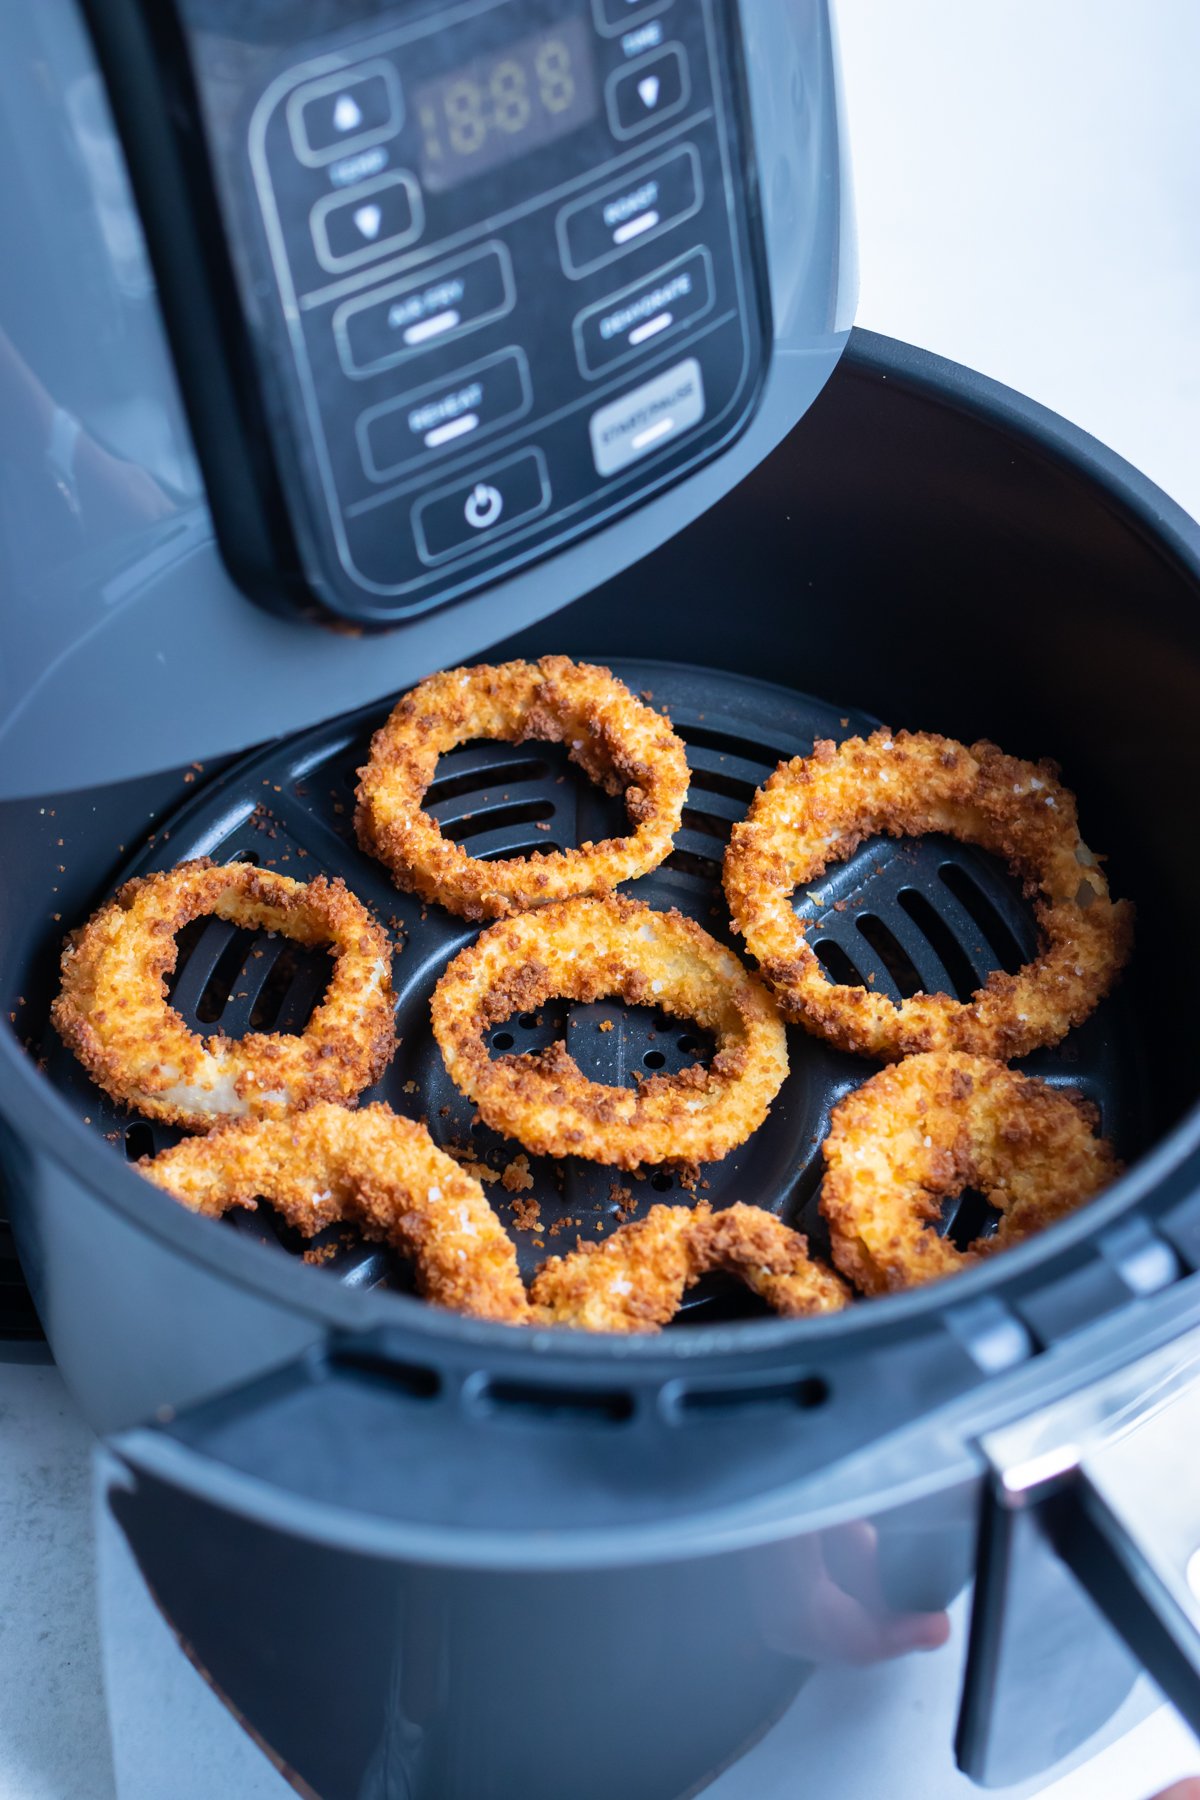 A layer of golden, crispy onion rings are shown in the air fryer.